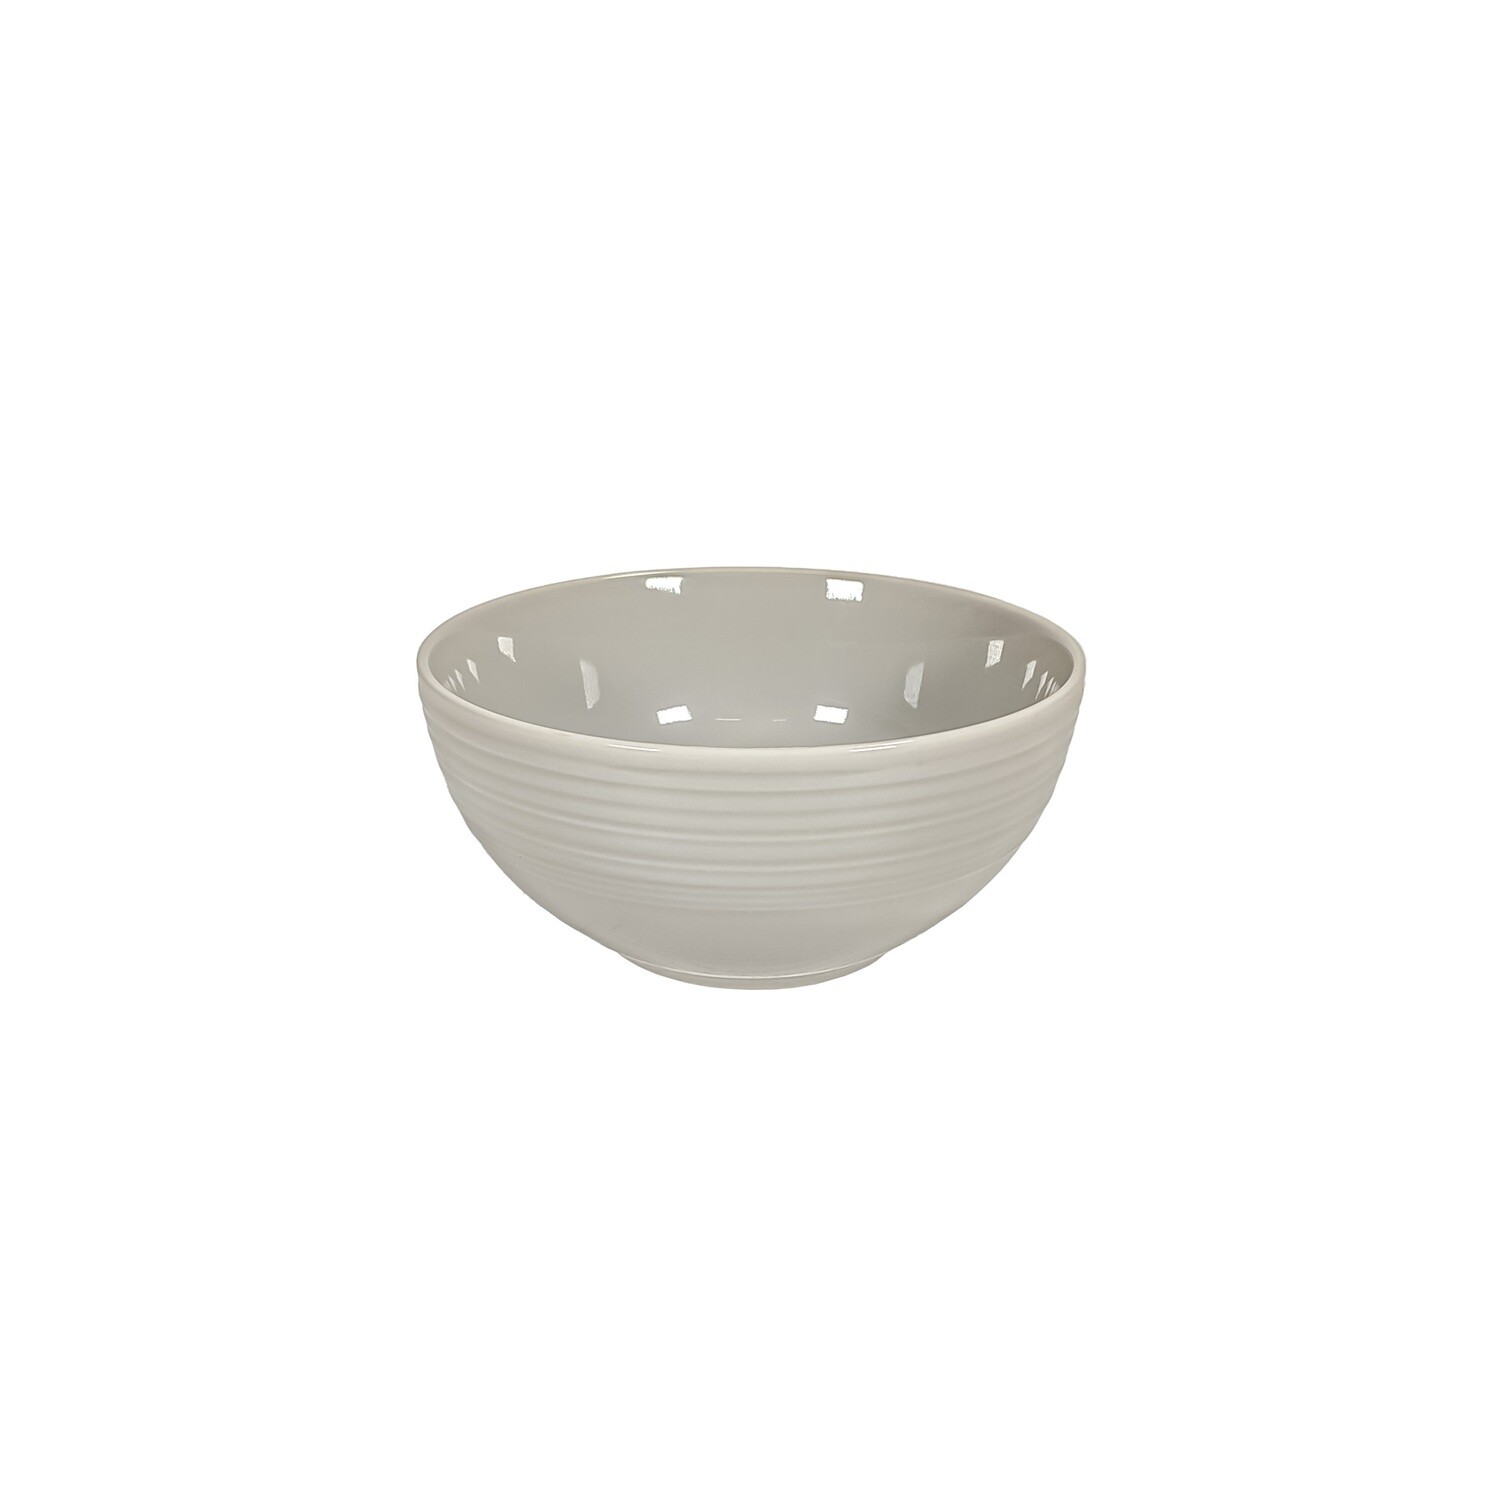 JENNA CLIFFORD - Embossed Lines Light Grey Cereal Bowl